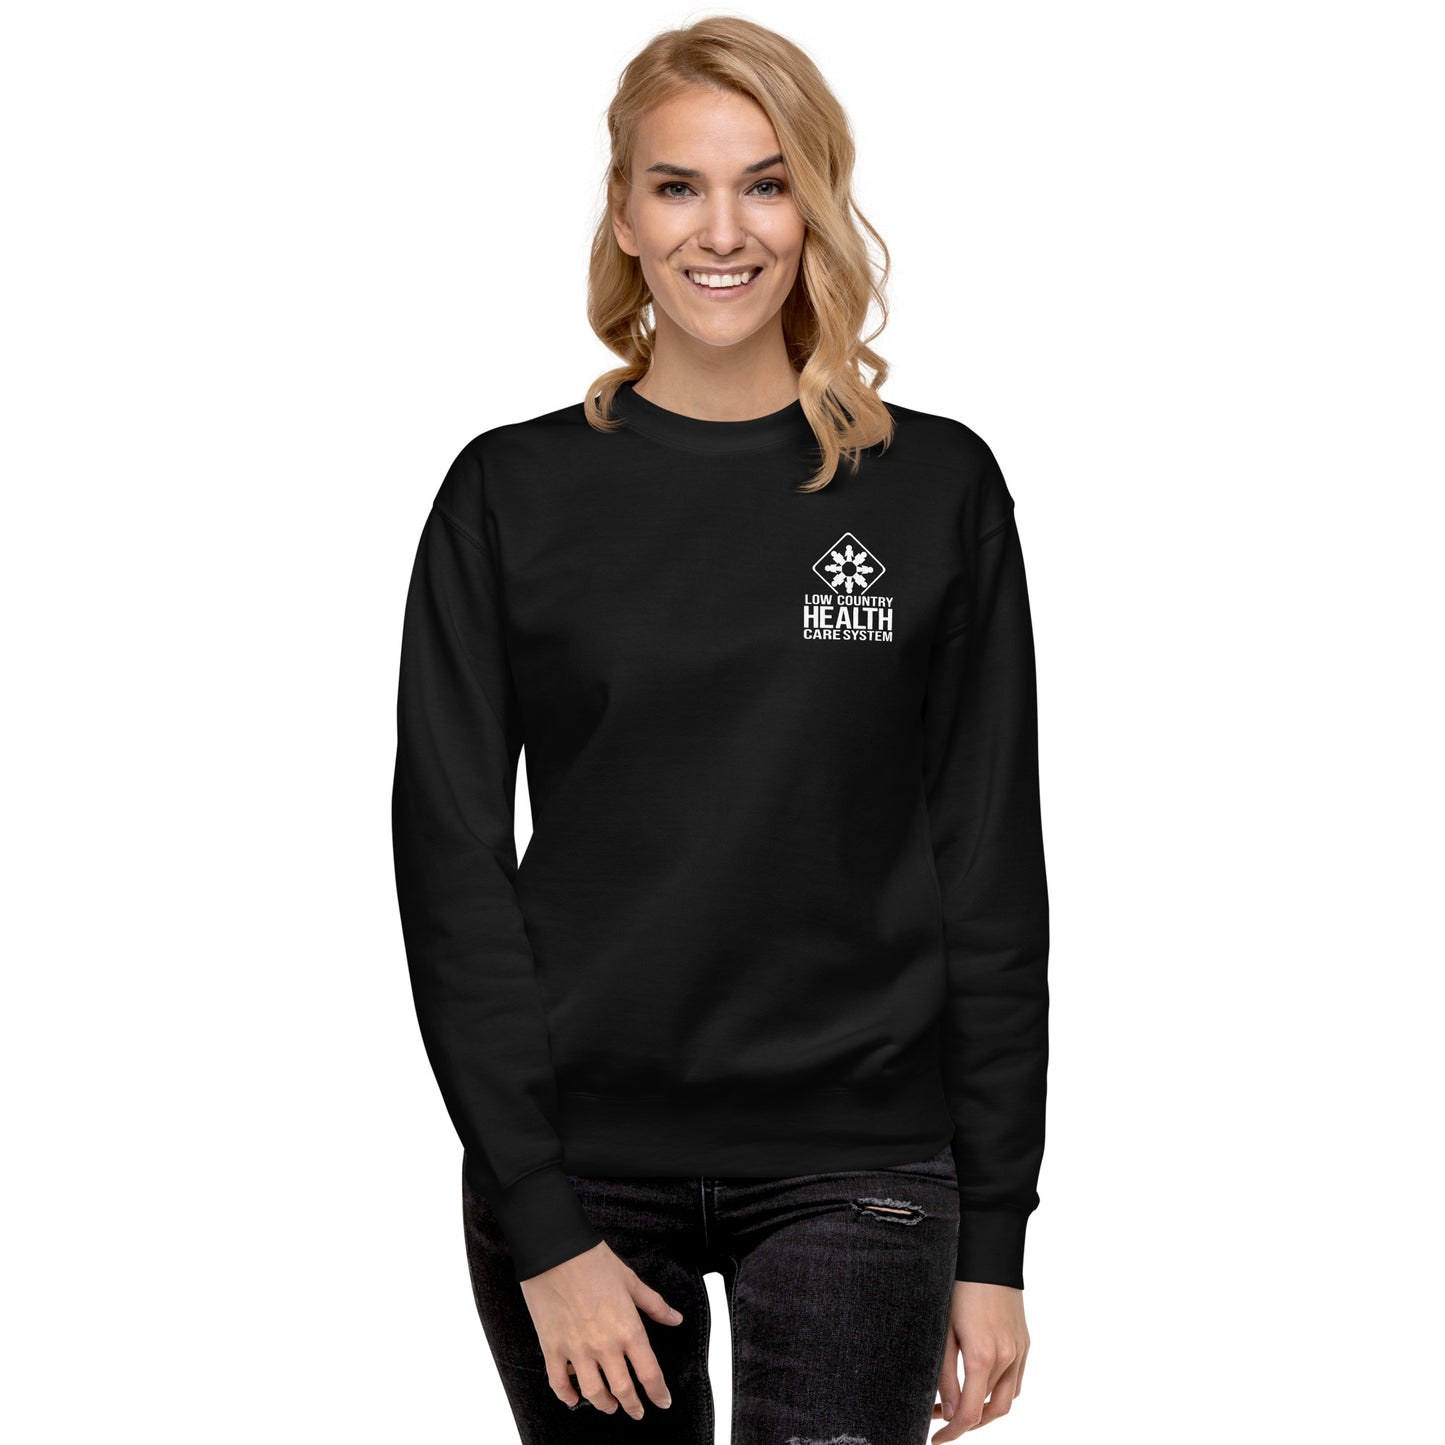 Unisex Premium Sweatshirt (fitted cut - double sided print)